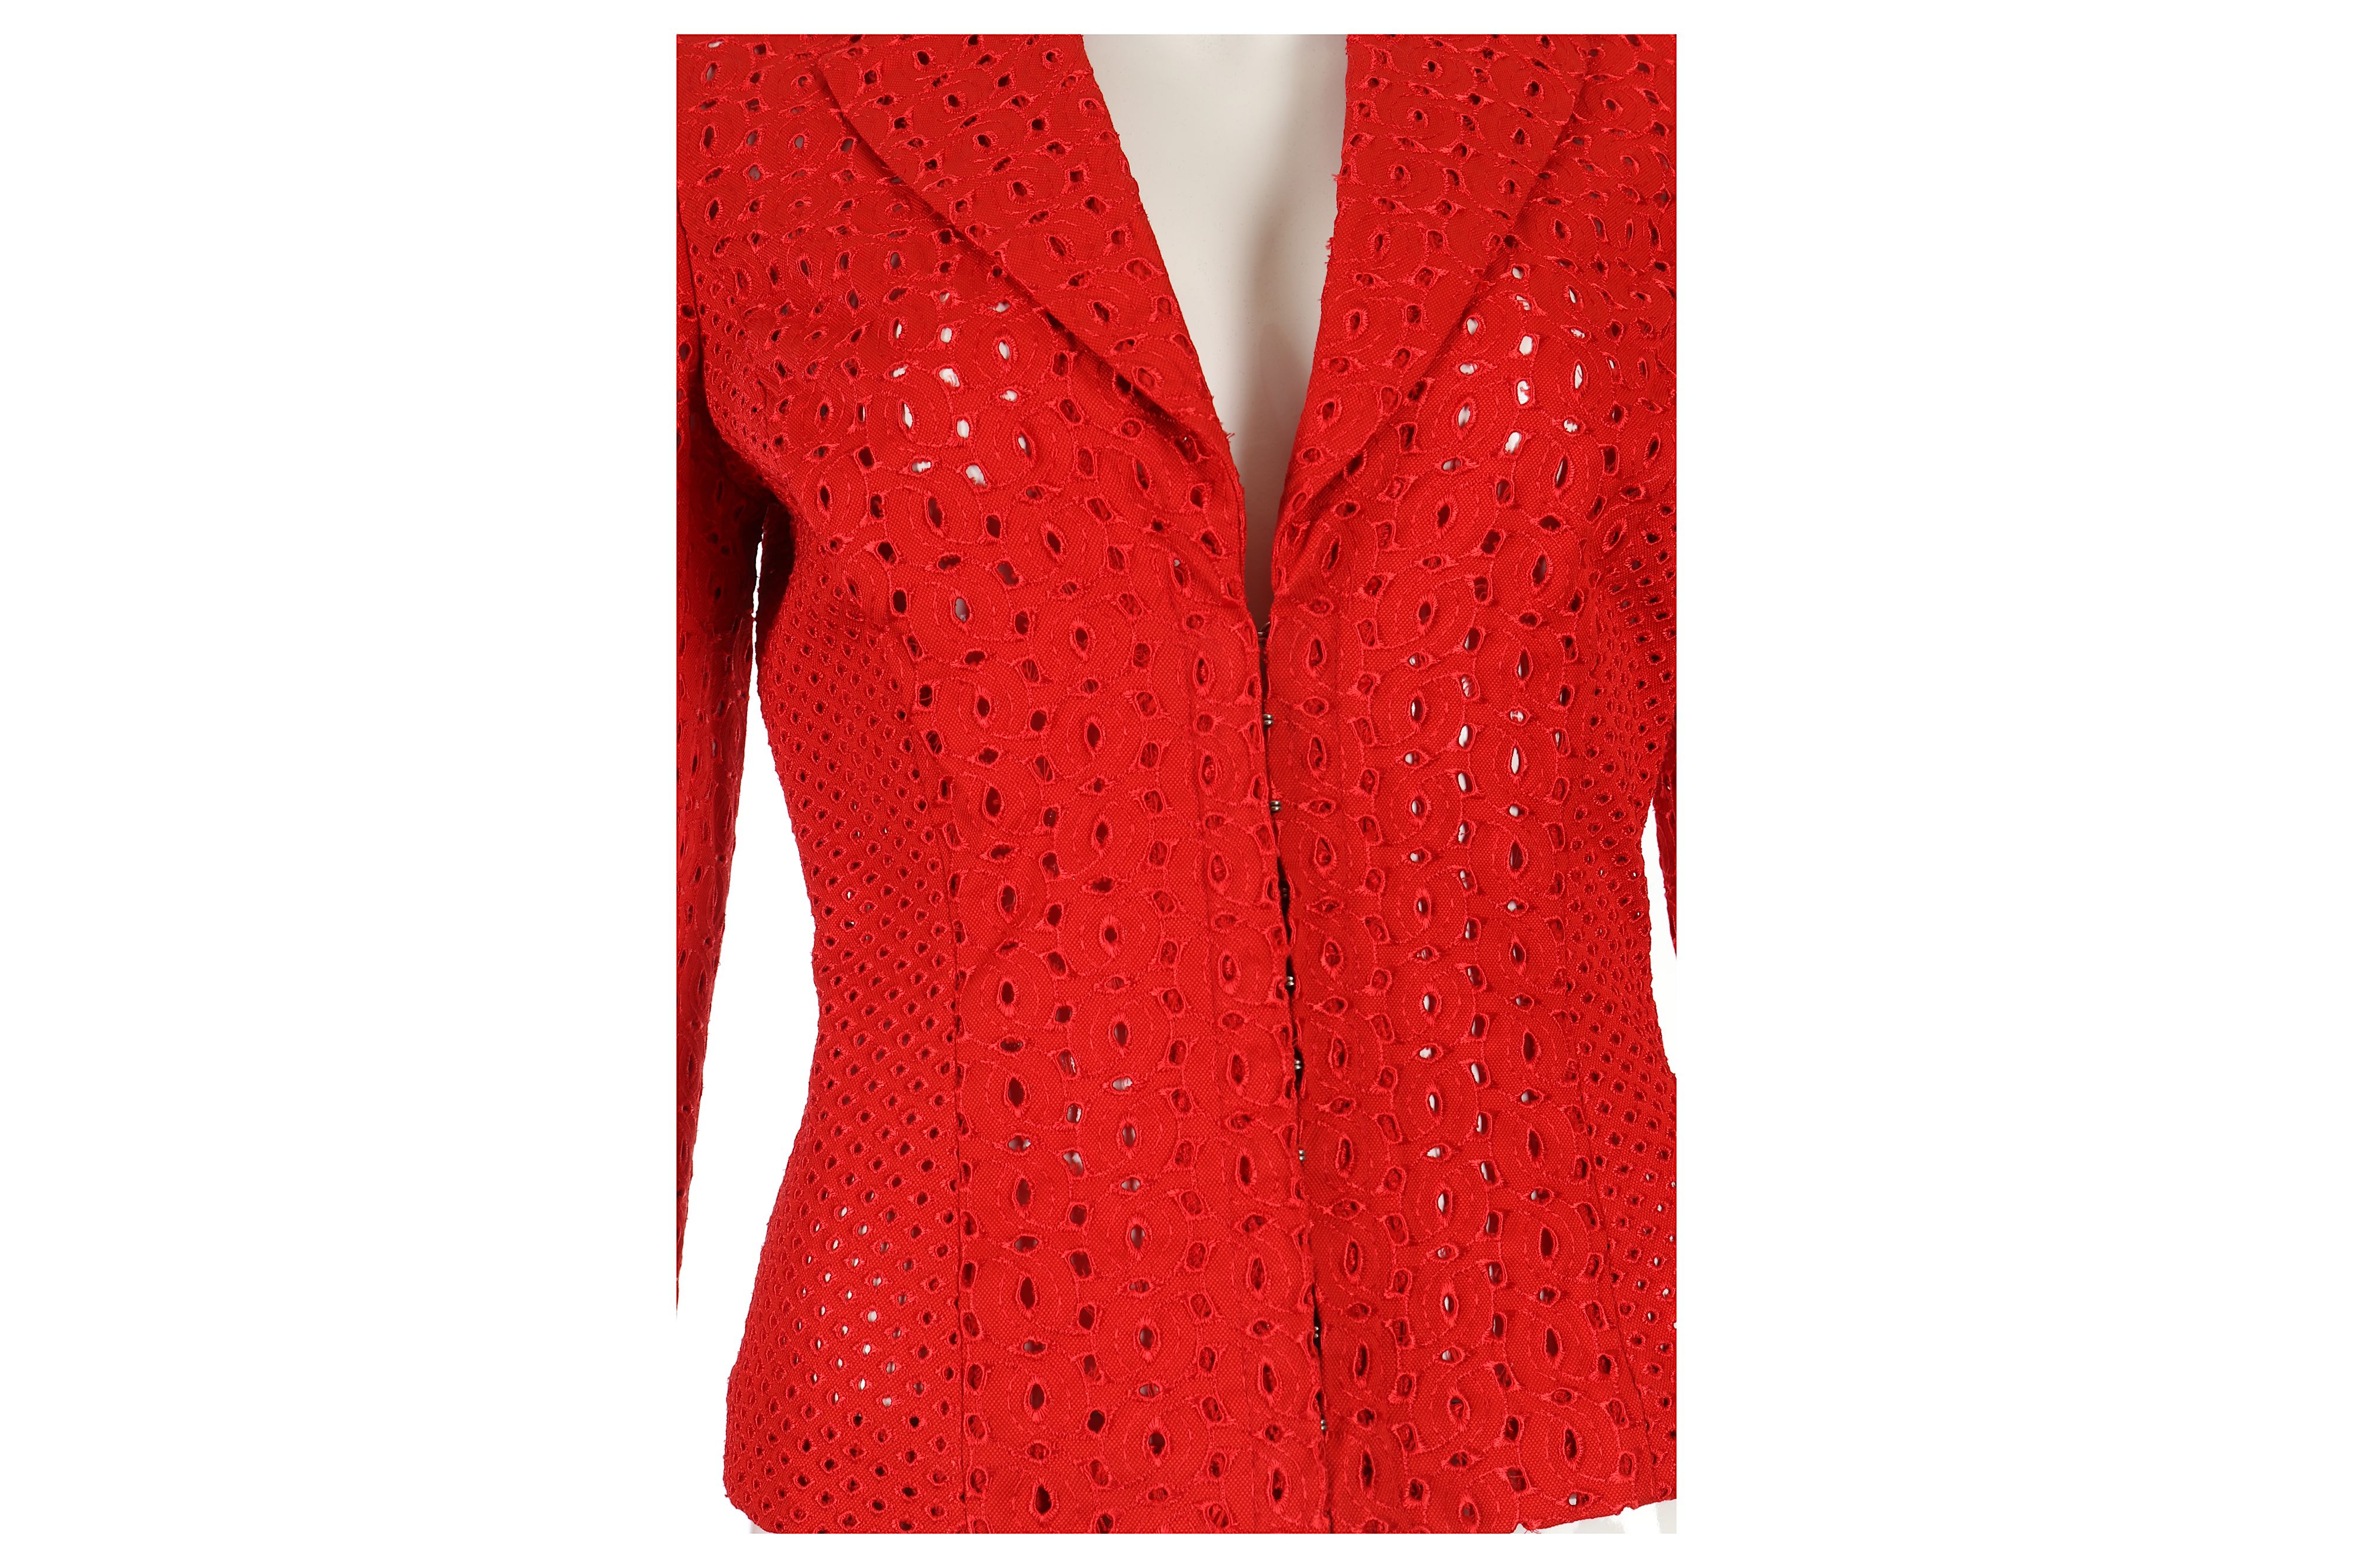 Gianni Versace Red Broderie Anglaise Jacket - size 38 - Image 5 of 5